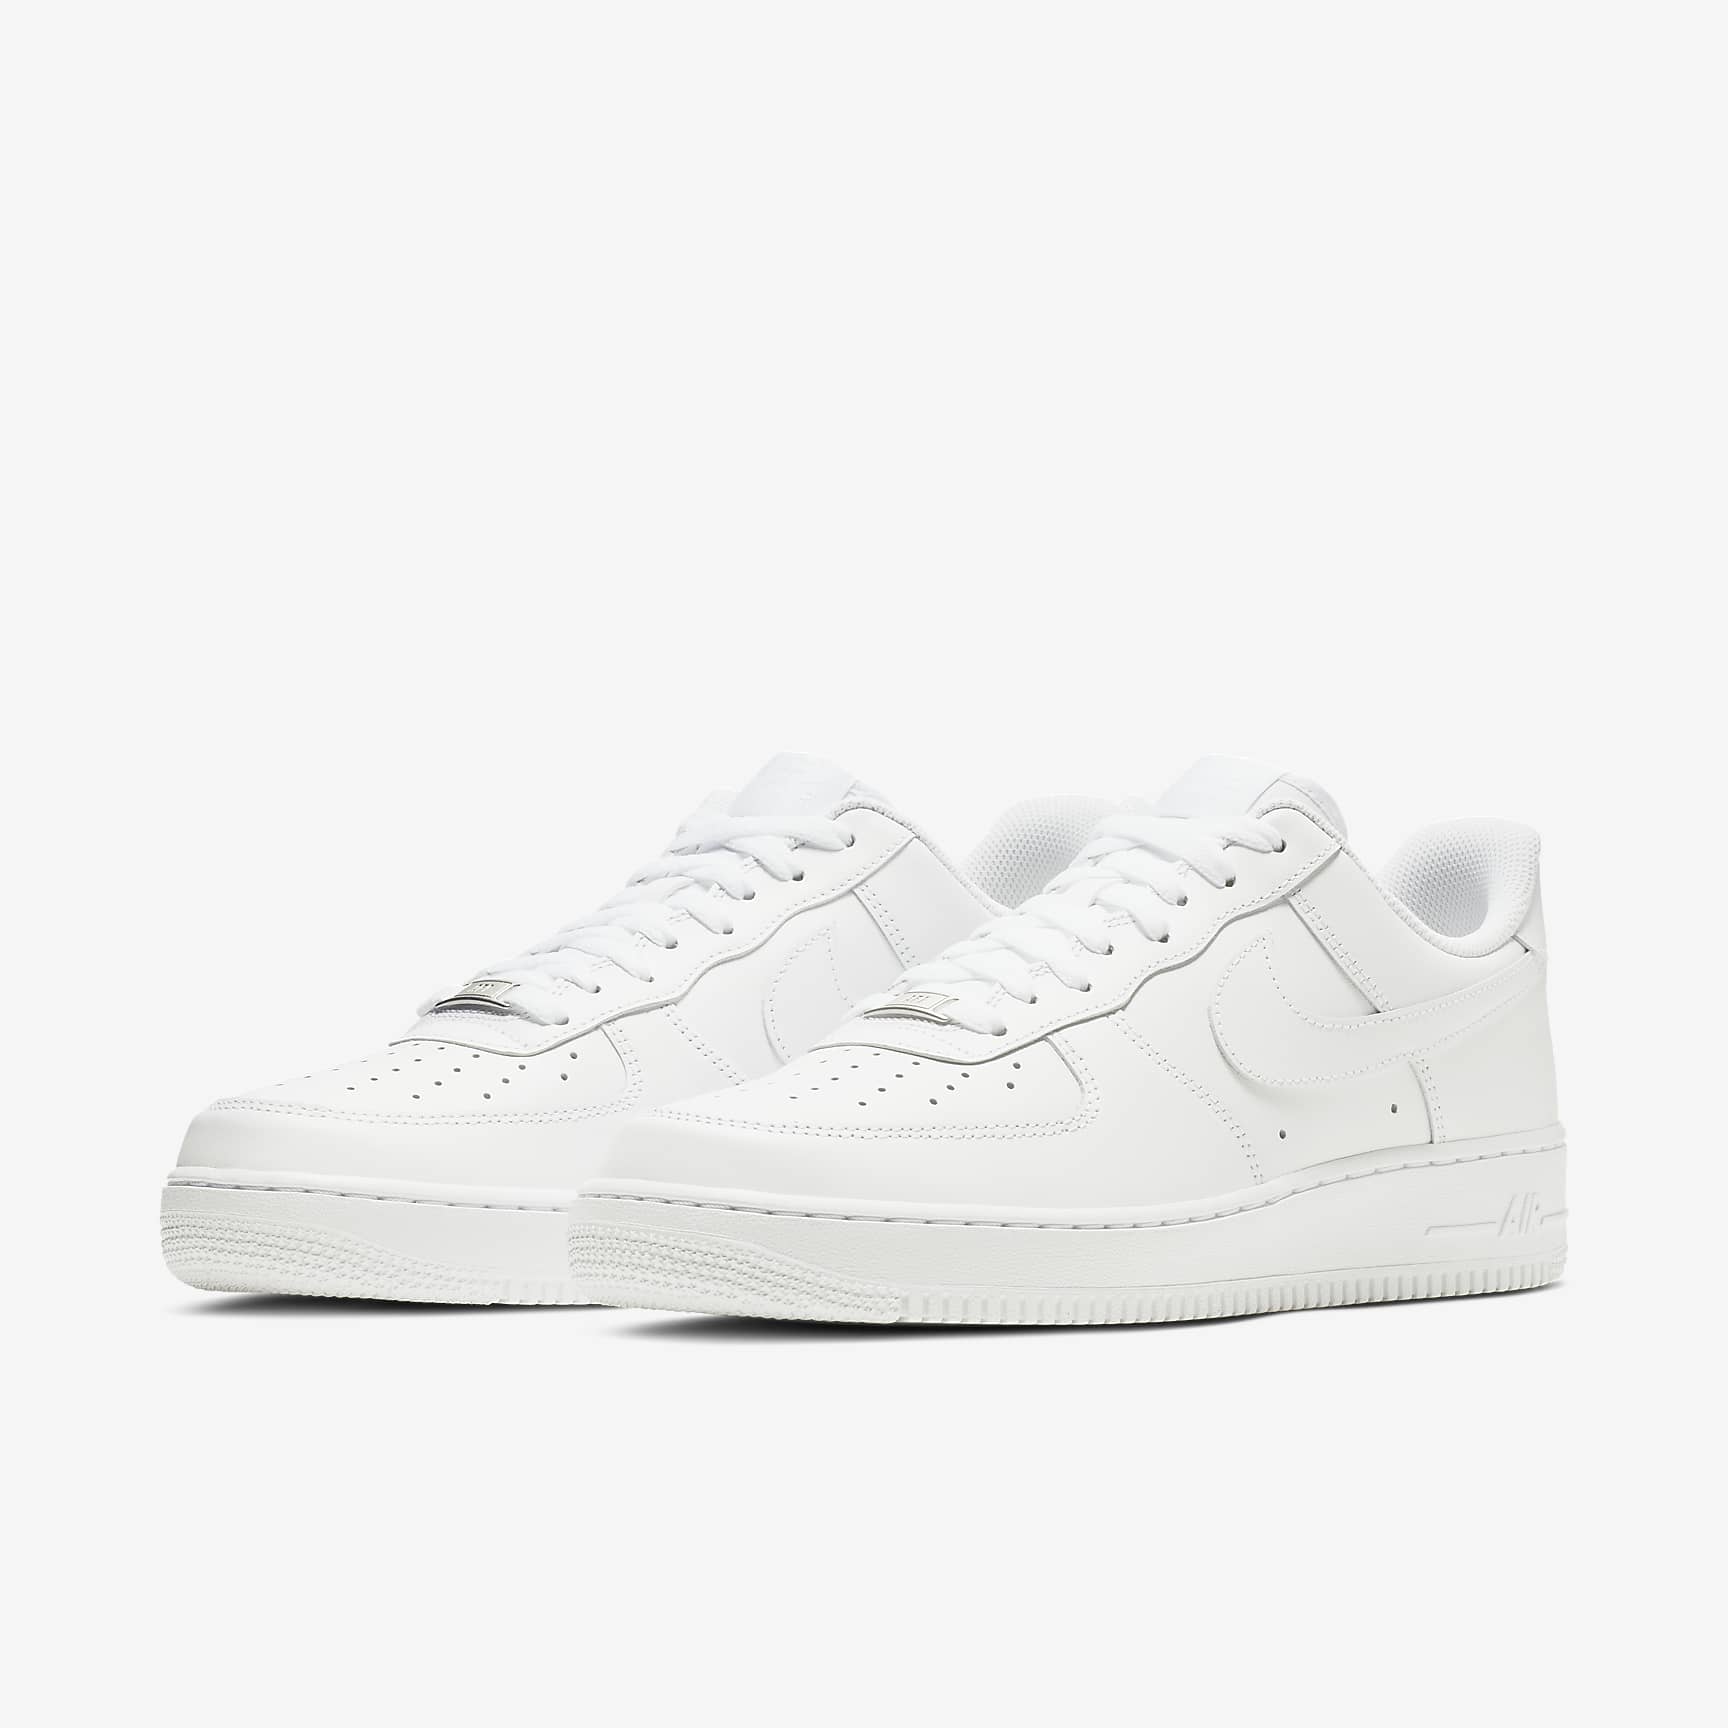 white air force 1 in store near me